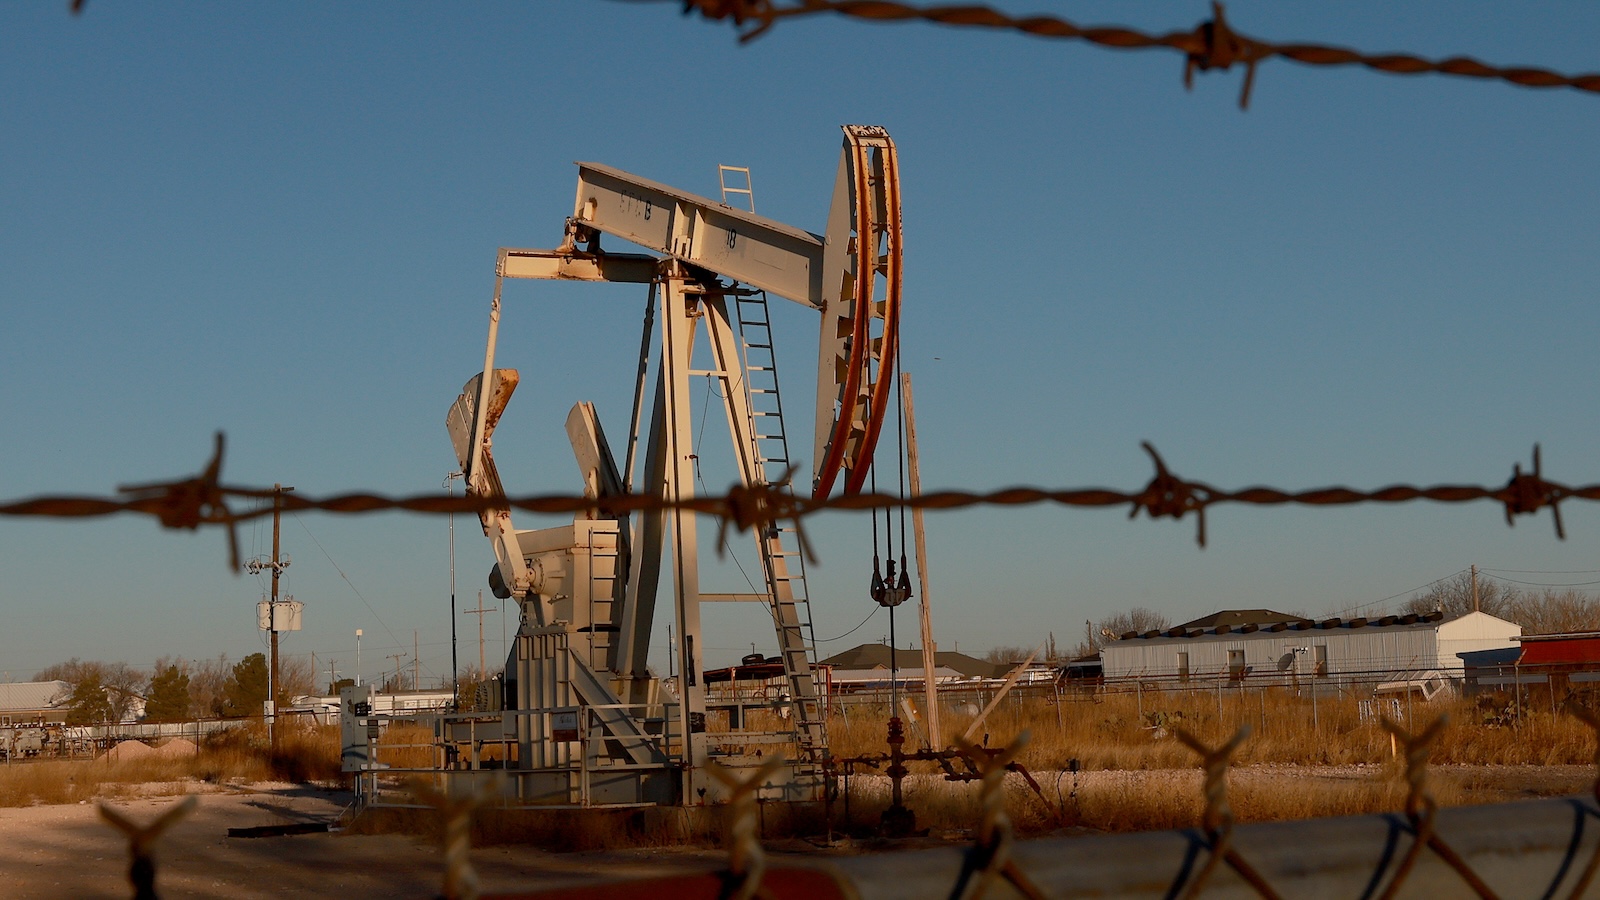 A pumpjack in an oil field, behind barbed wire fence.